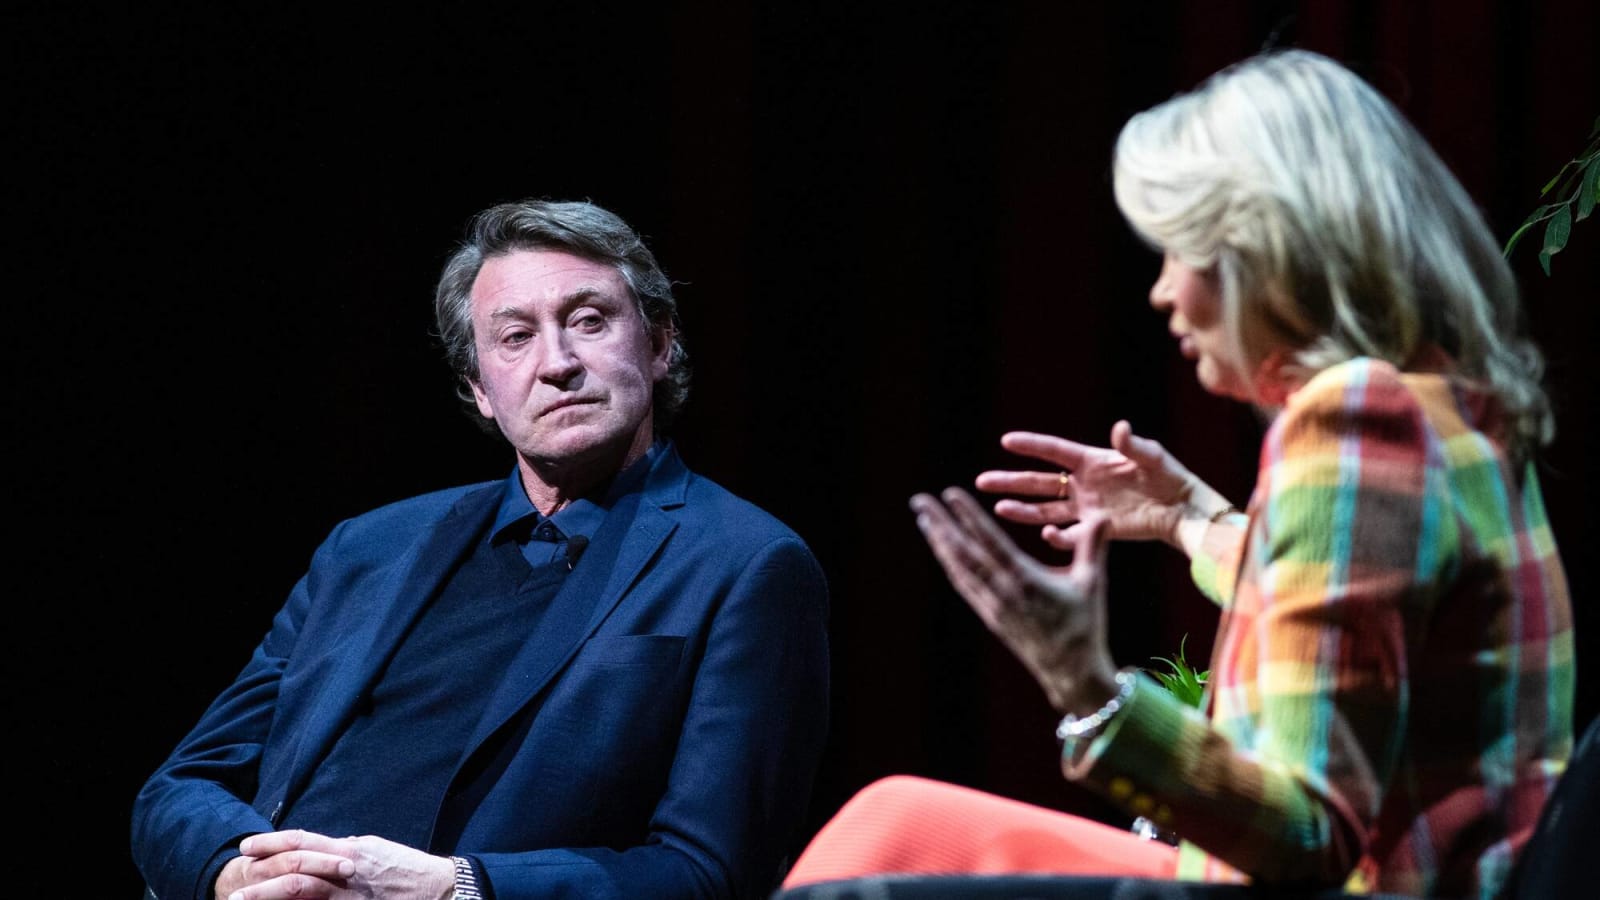 Wayne Gretzky REGRETS declining Canucks ownership with millions on line in 80s